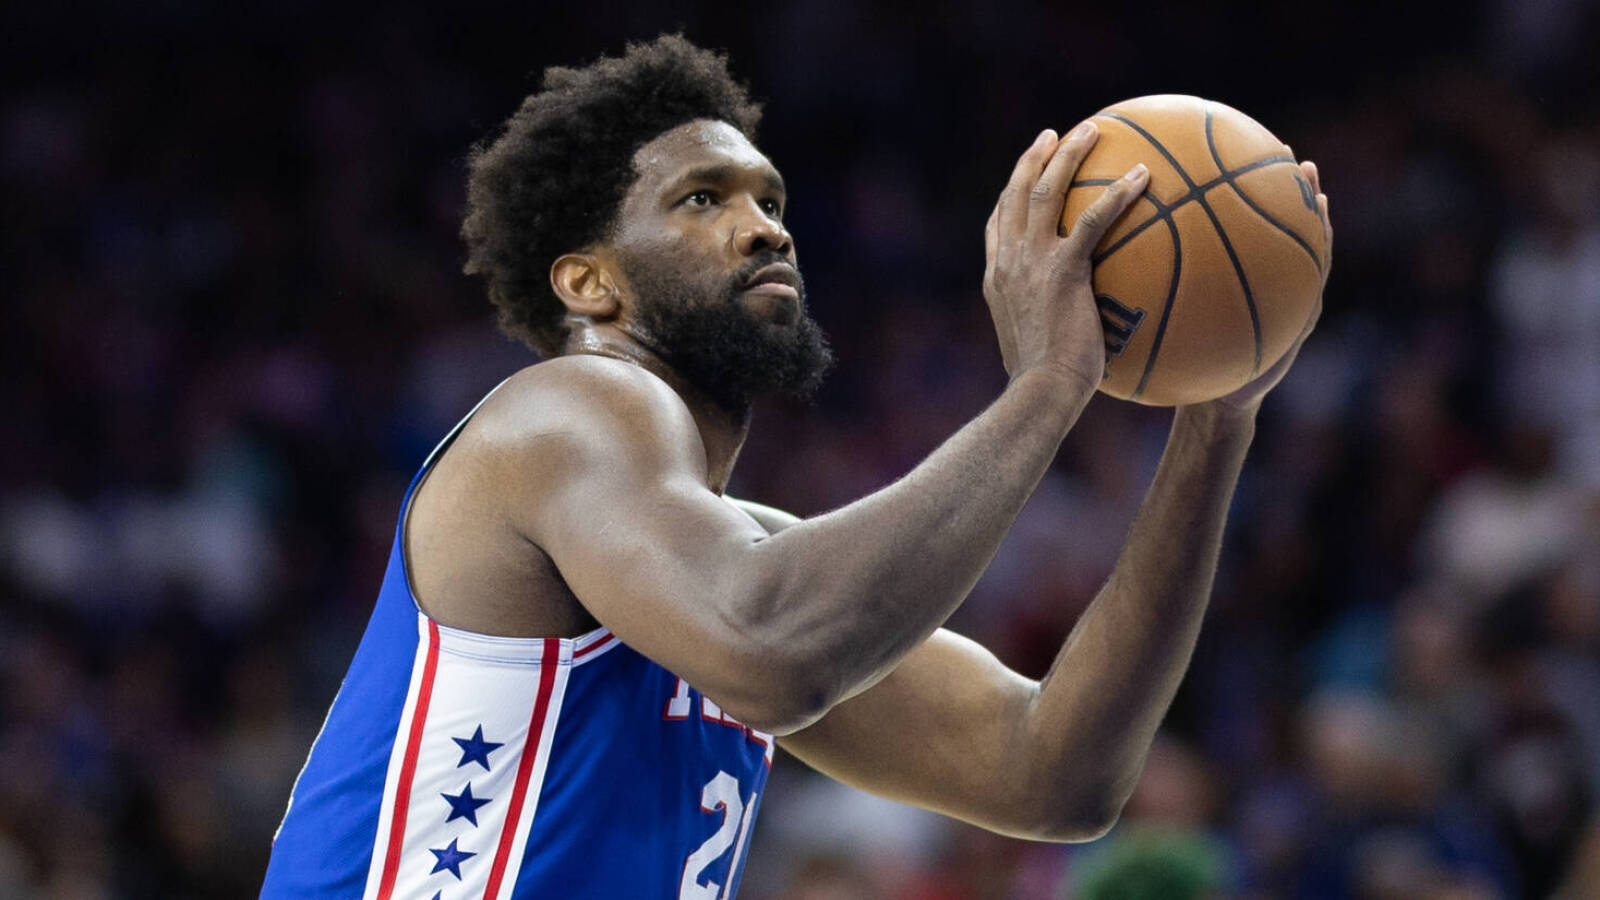 Joel Embiid's big night could give him edge in MVP race